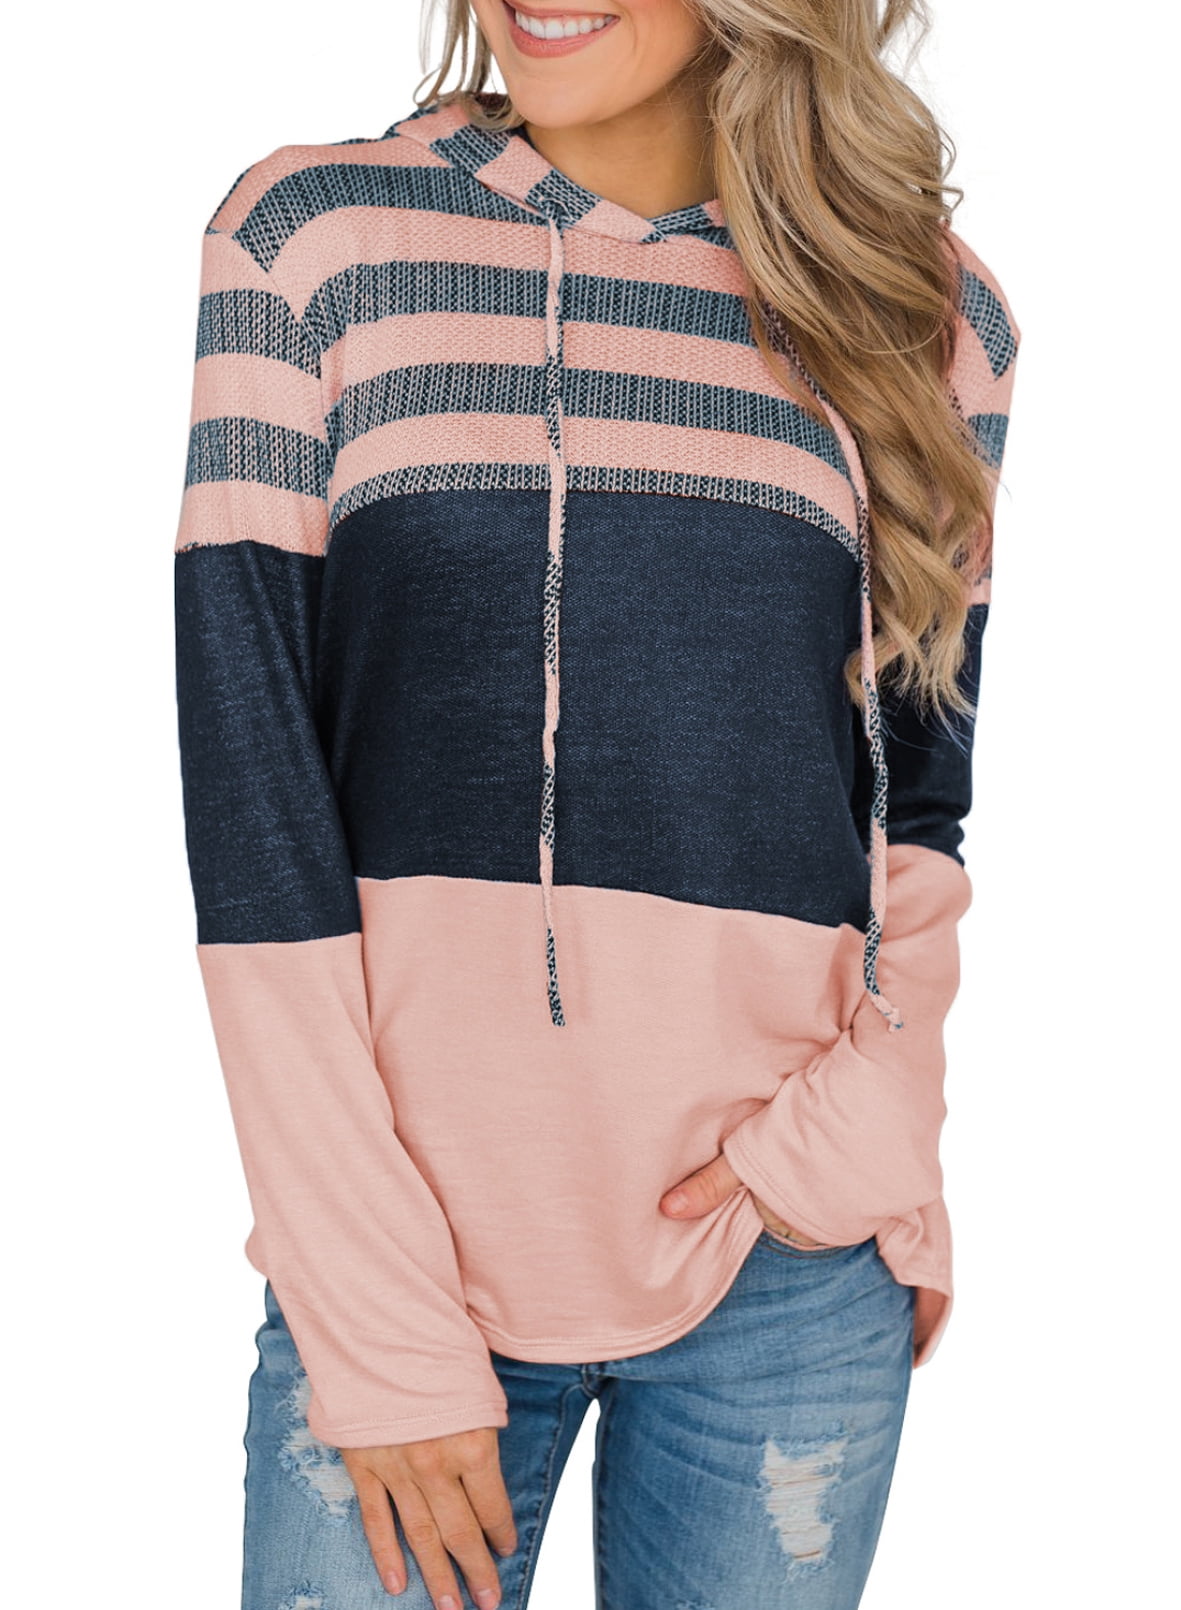 Womens Tops Color Block Hoodie Drawstring Long Sleeve Sweatshirt with Front Pocket Causal Tunic Pullover Tops 